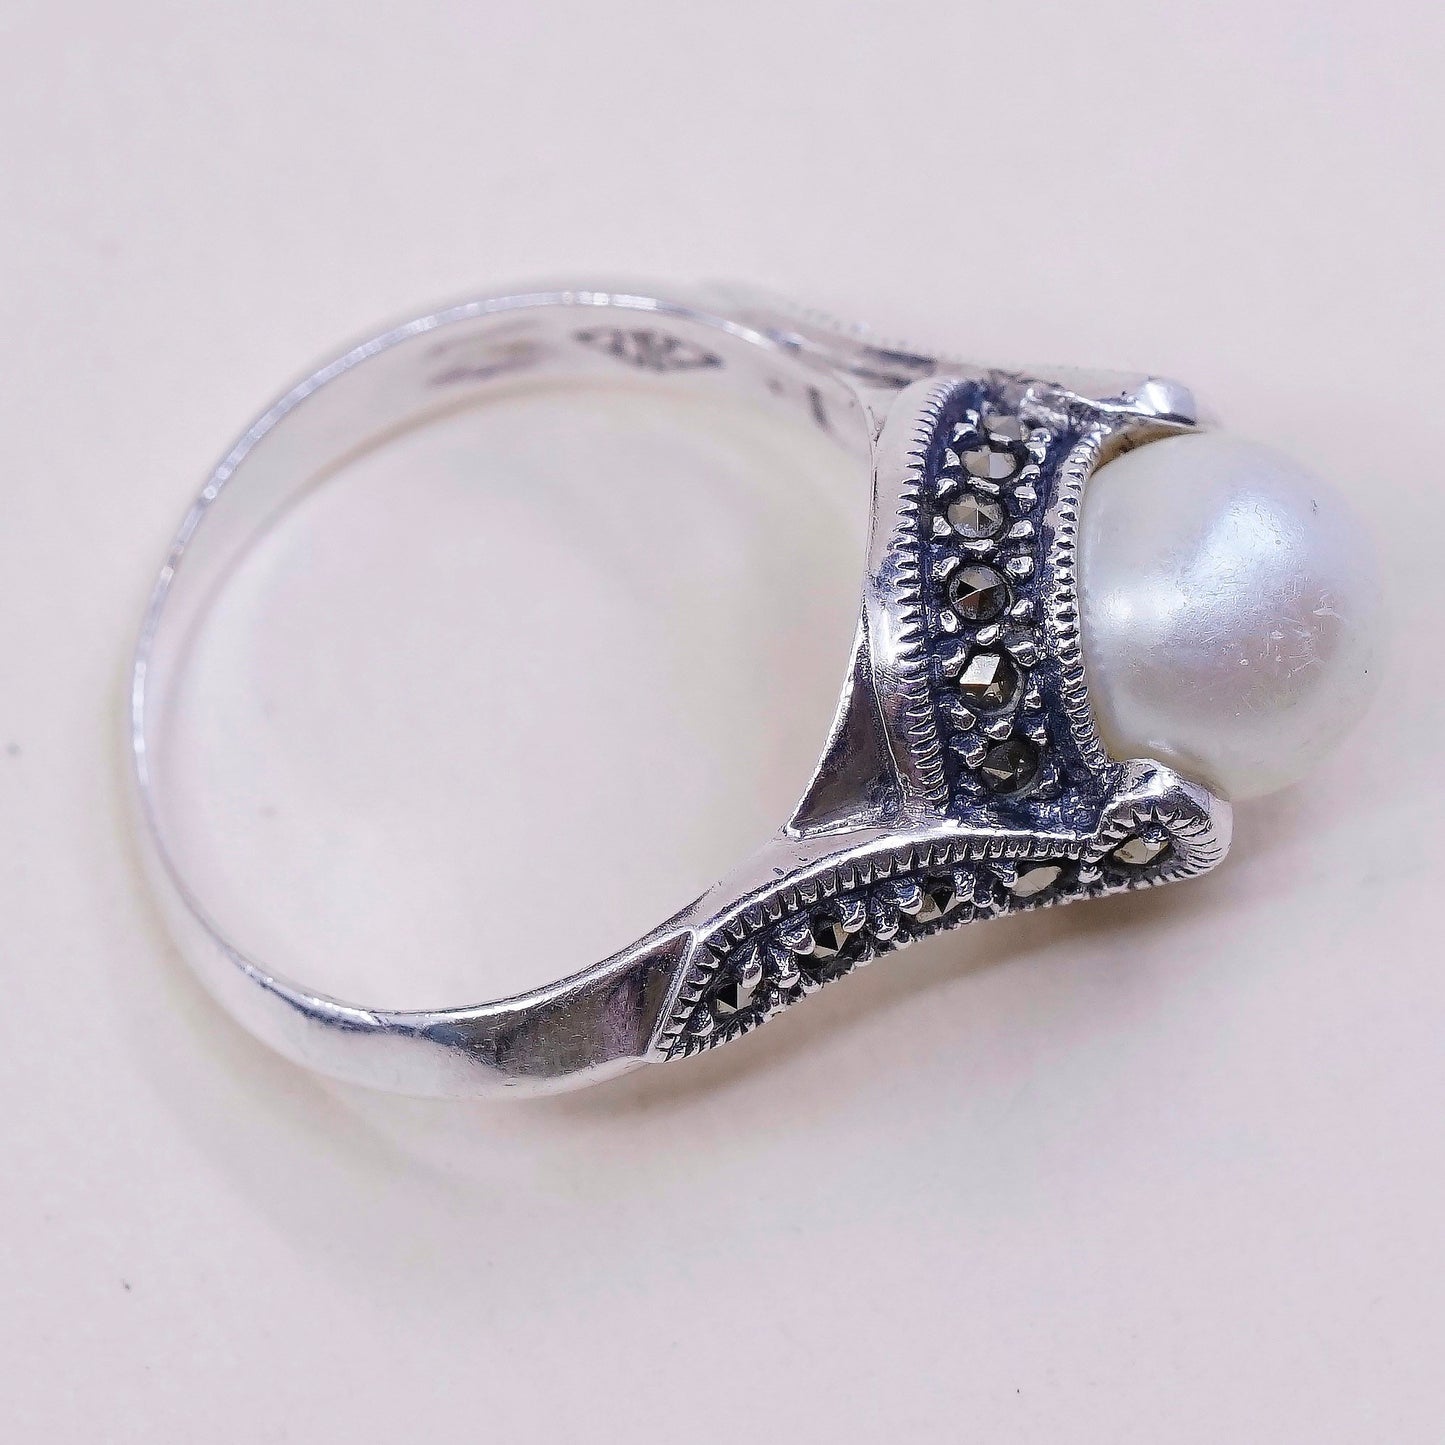 sz 7.25, Judith Jack sterling 925 silver handmade ring w/ pearl and marcasite